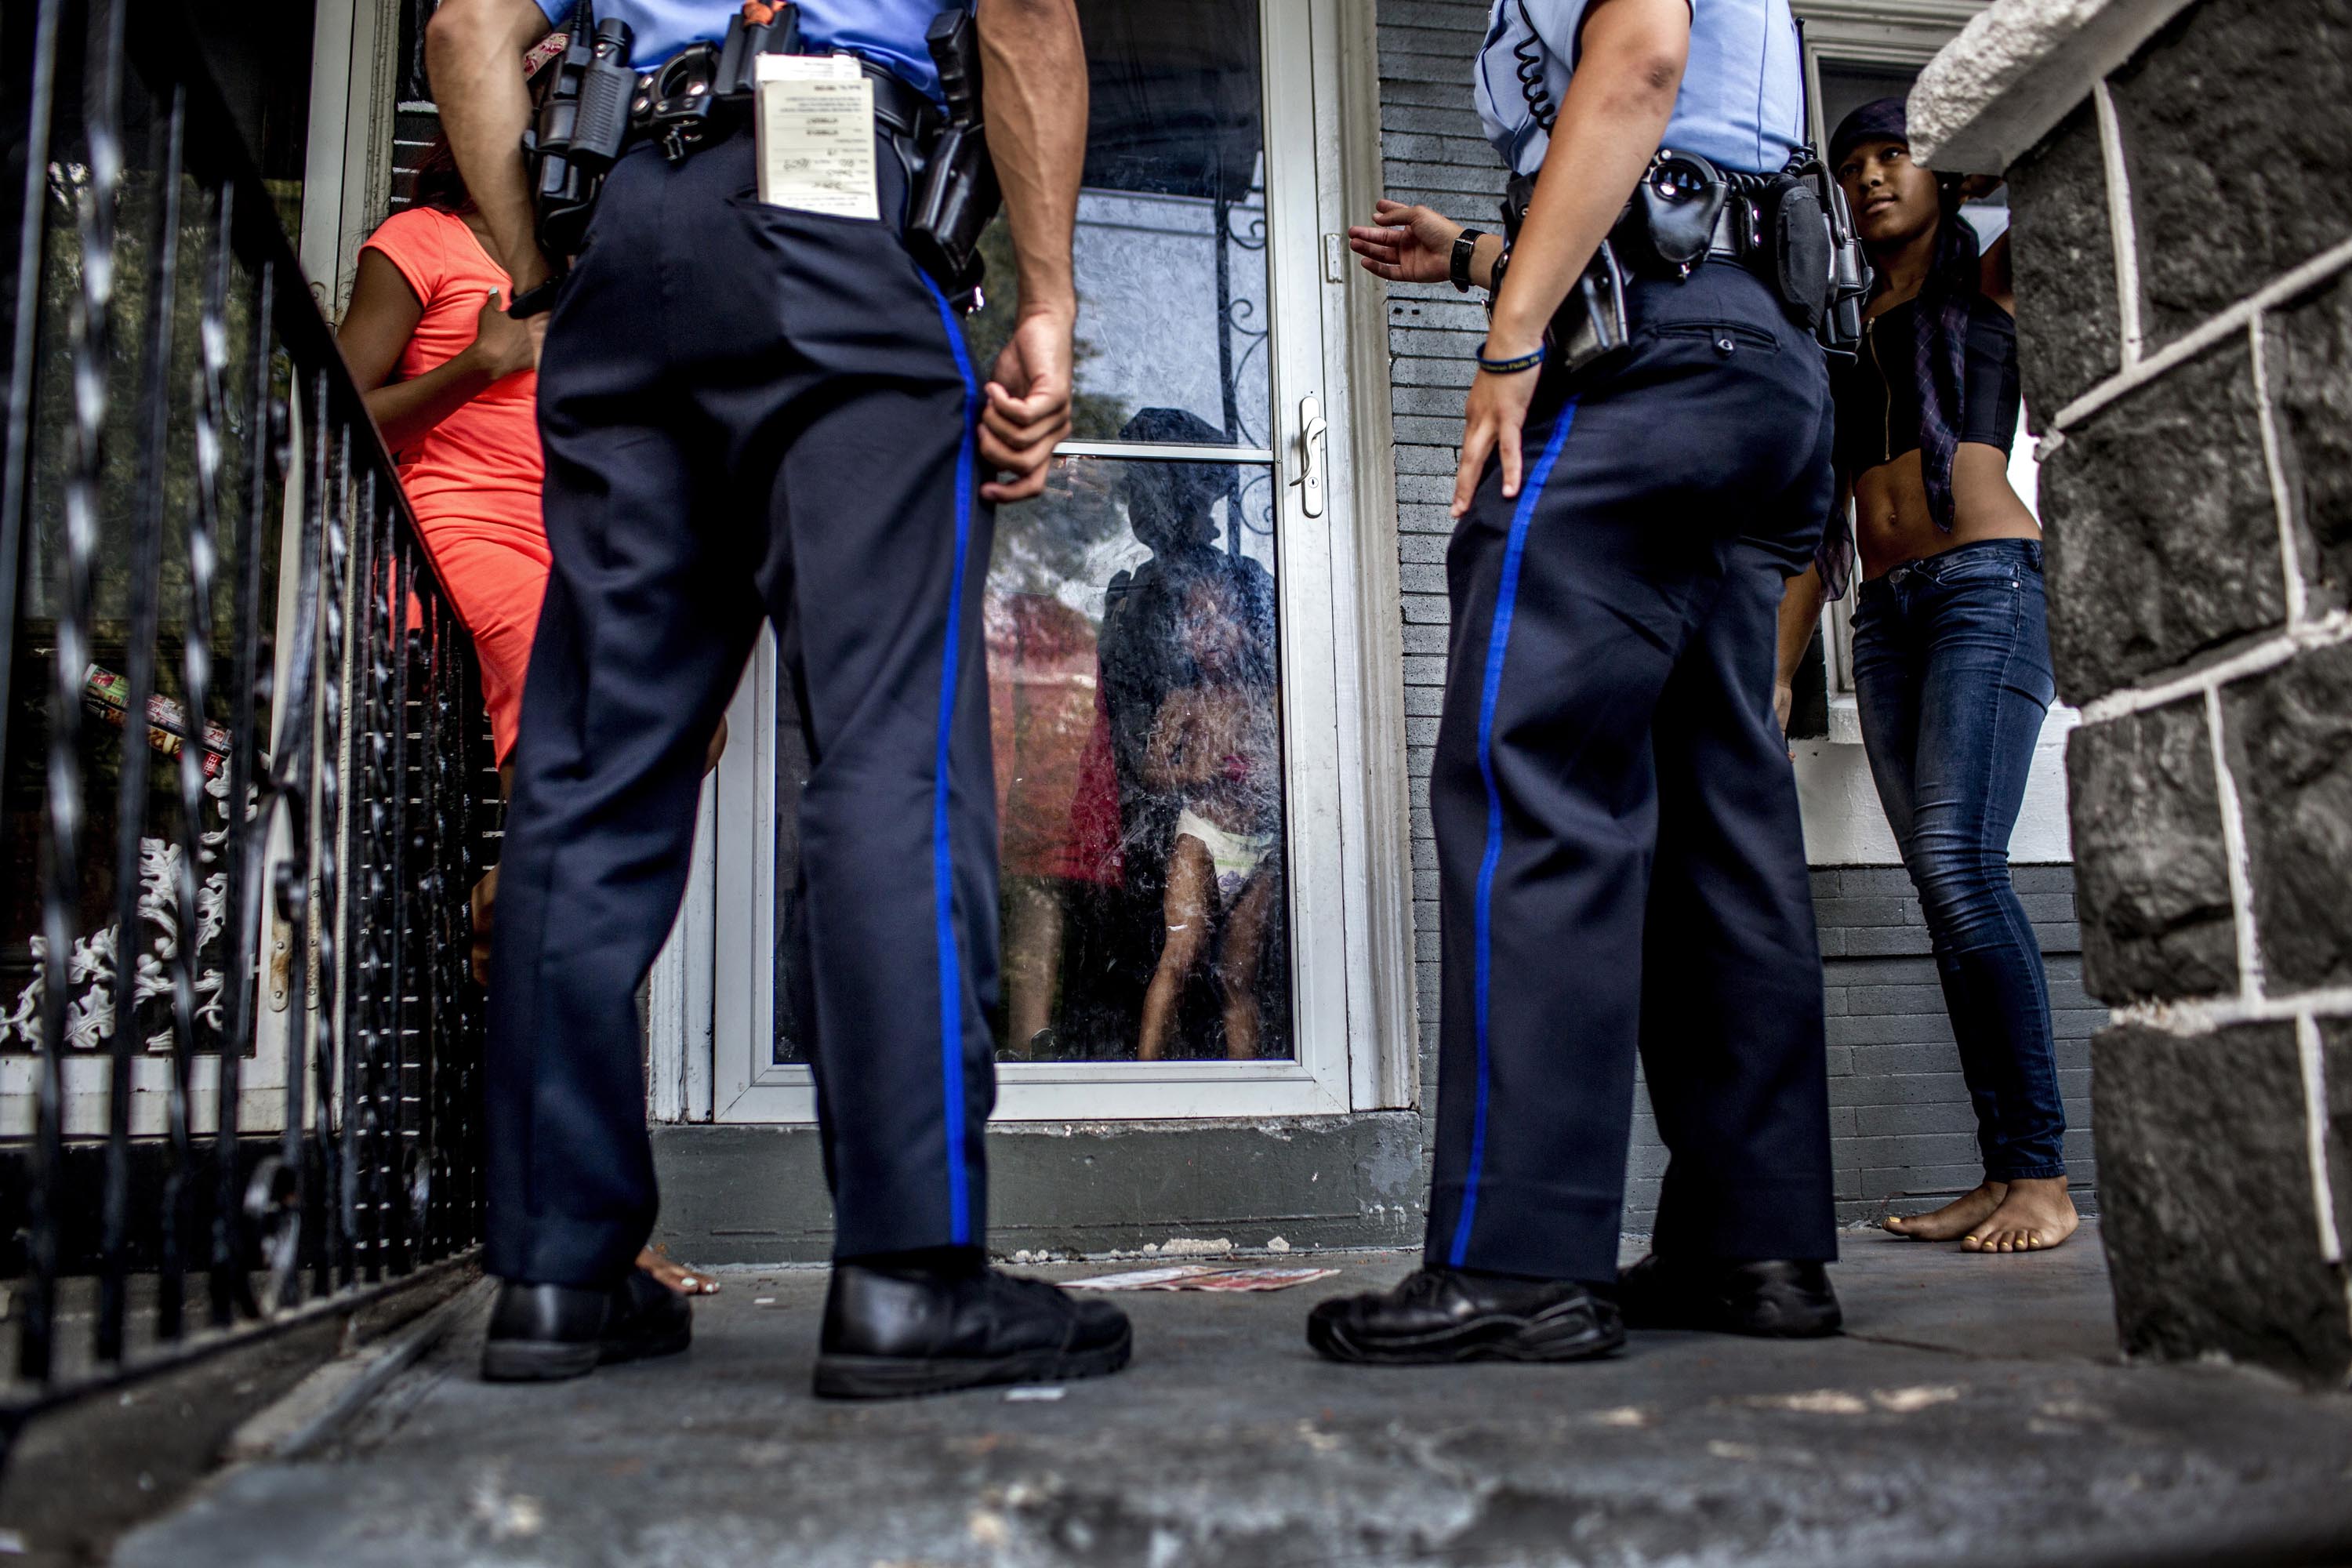 Police officers respond to a young woman who said she was threatened by an ex-boyfriend on July 28 in Philadelphia’s 19th District (Natalie Keyssar for TIME)